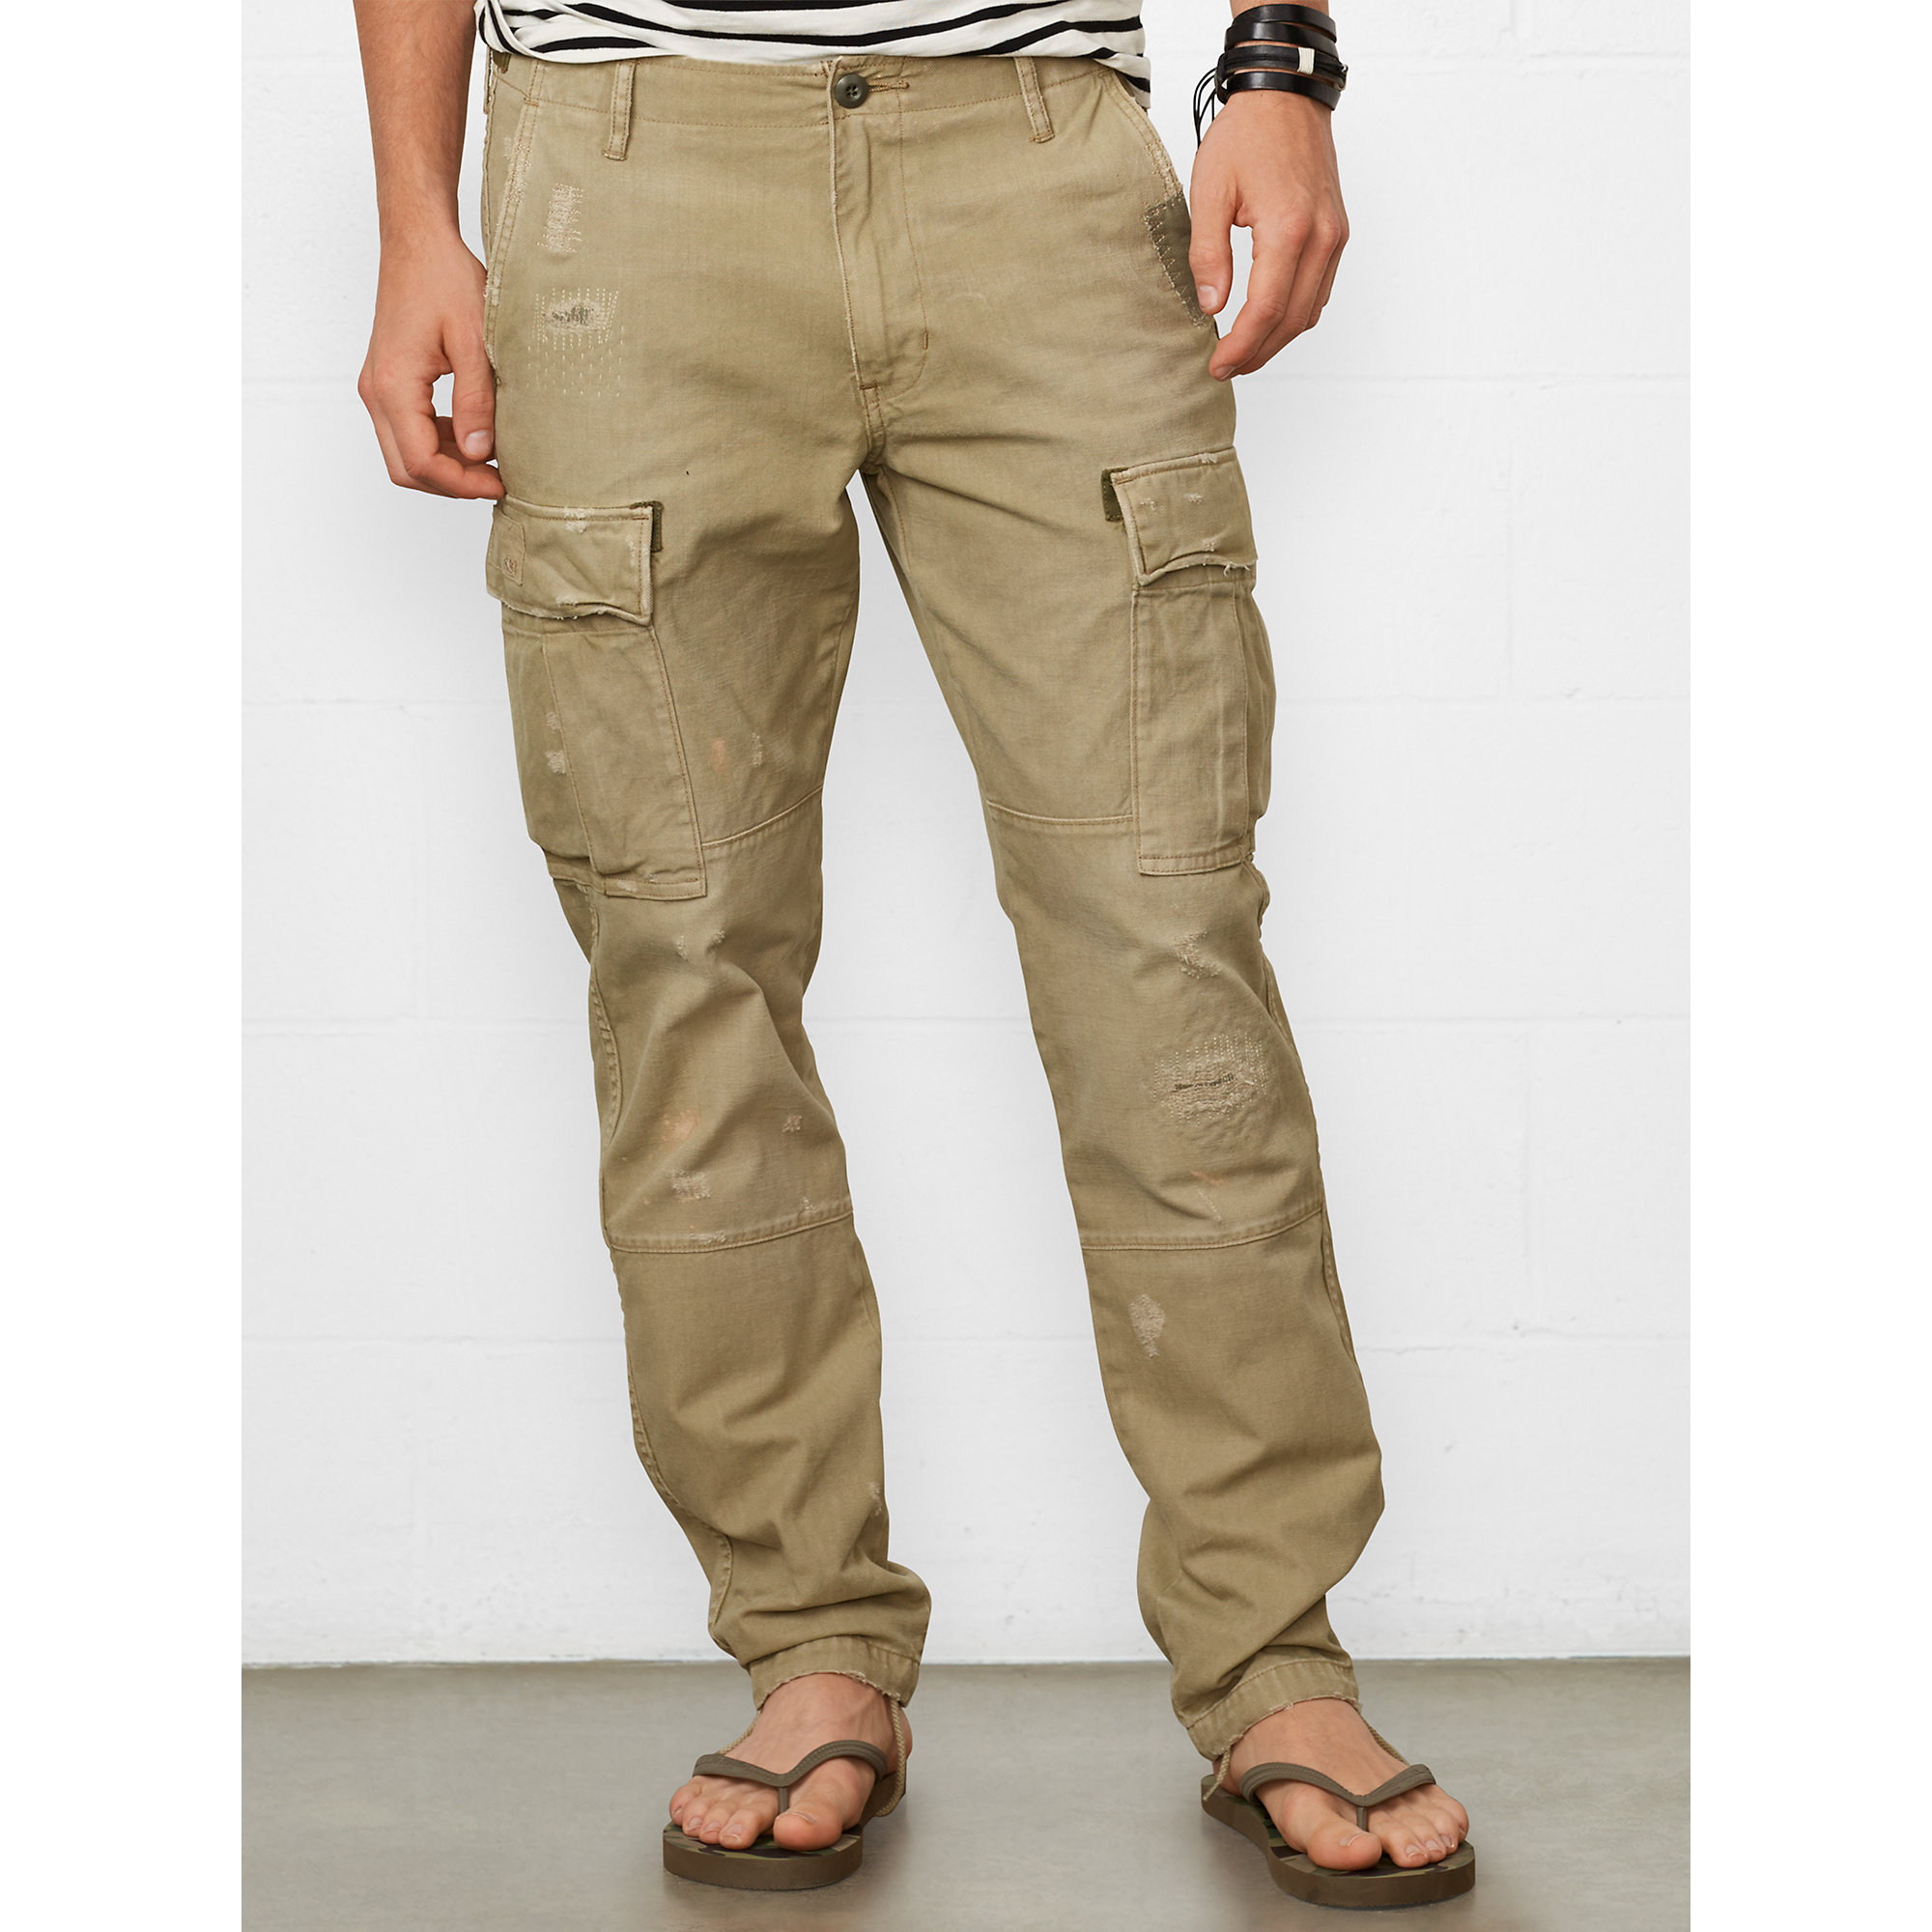 Denim Supply  Tapered Leg Cargo Pant Product 1 24385141 2 739331115 Normal 